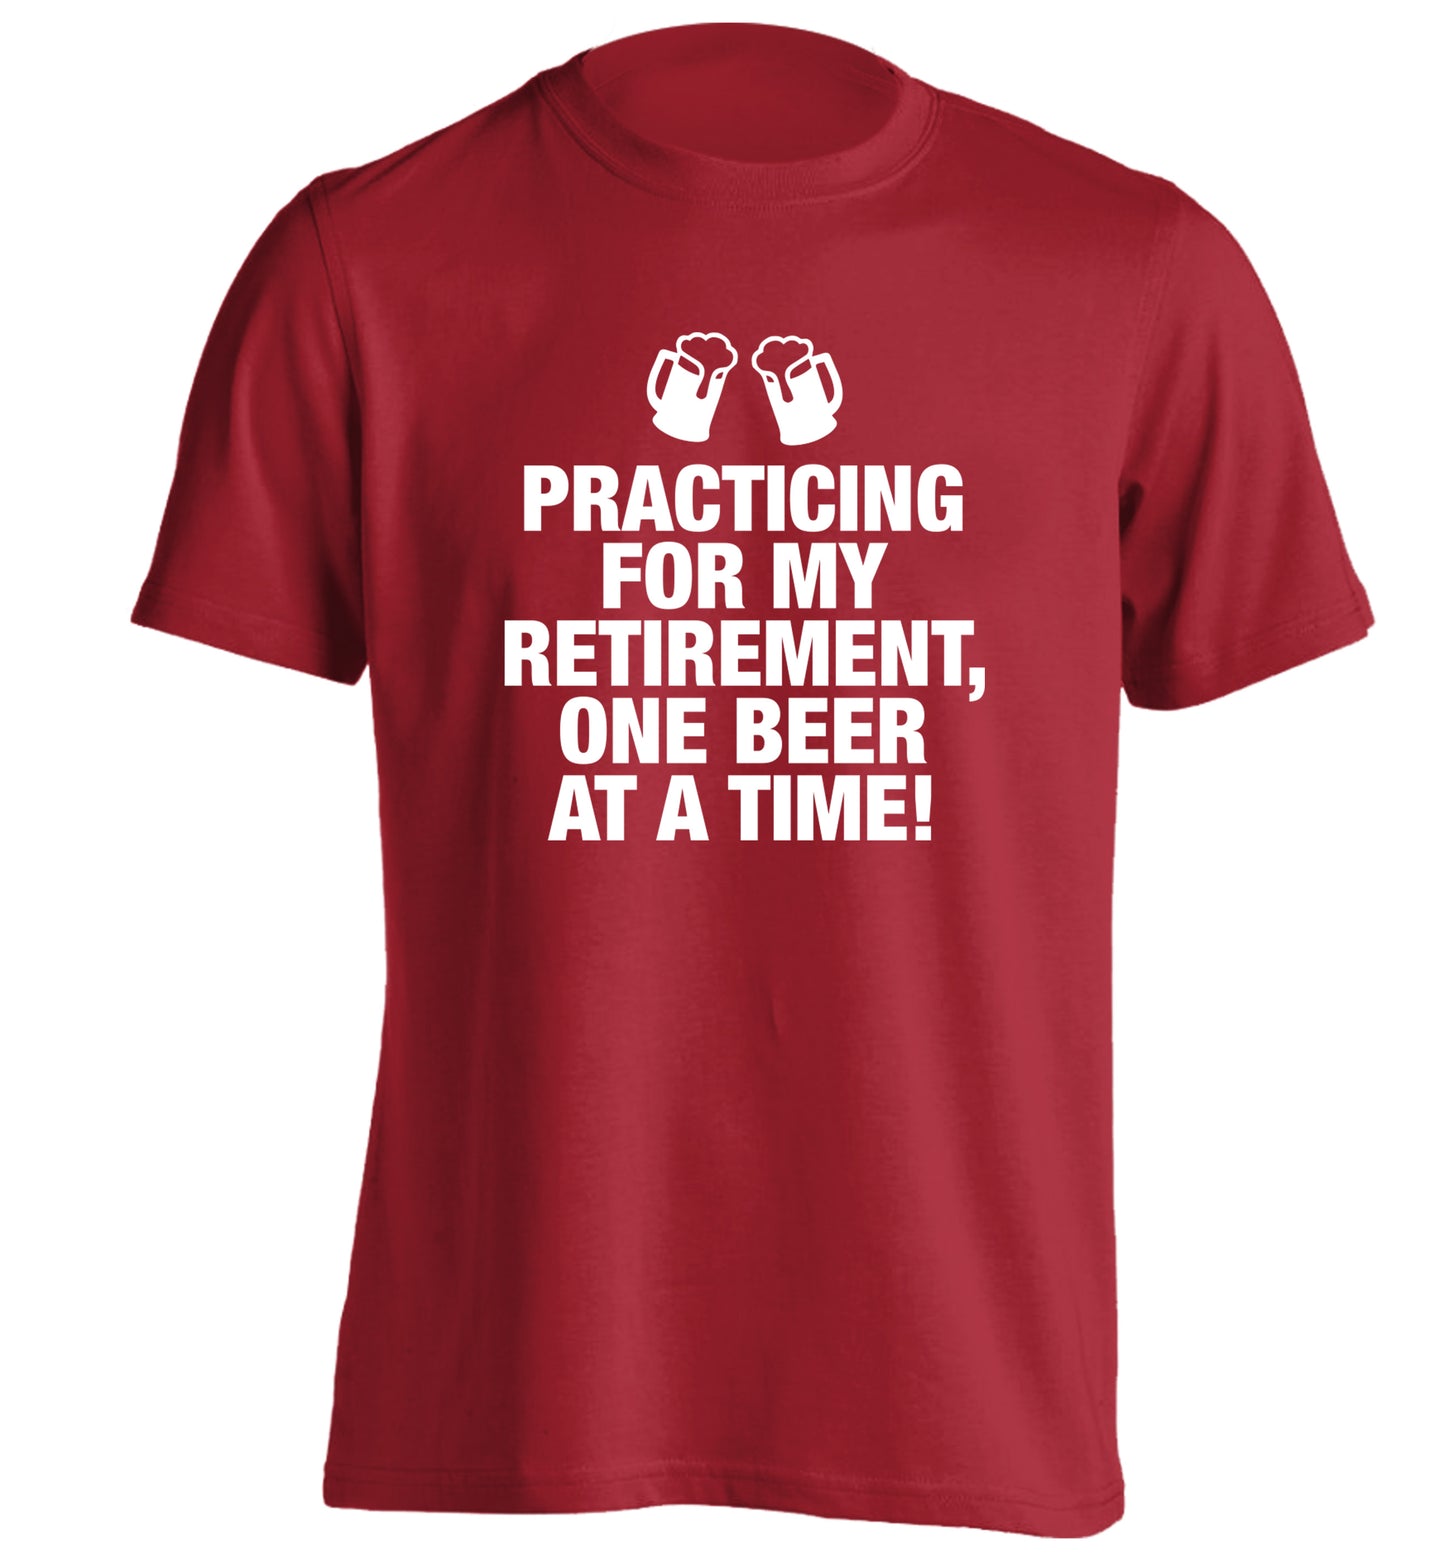 Practicing my retirement one beer at a time adults unisex red Tshirt 2XL